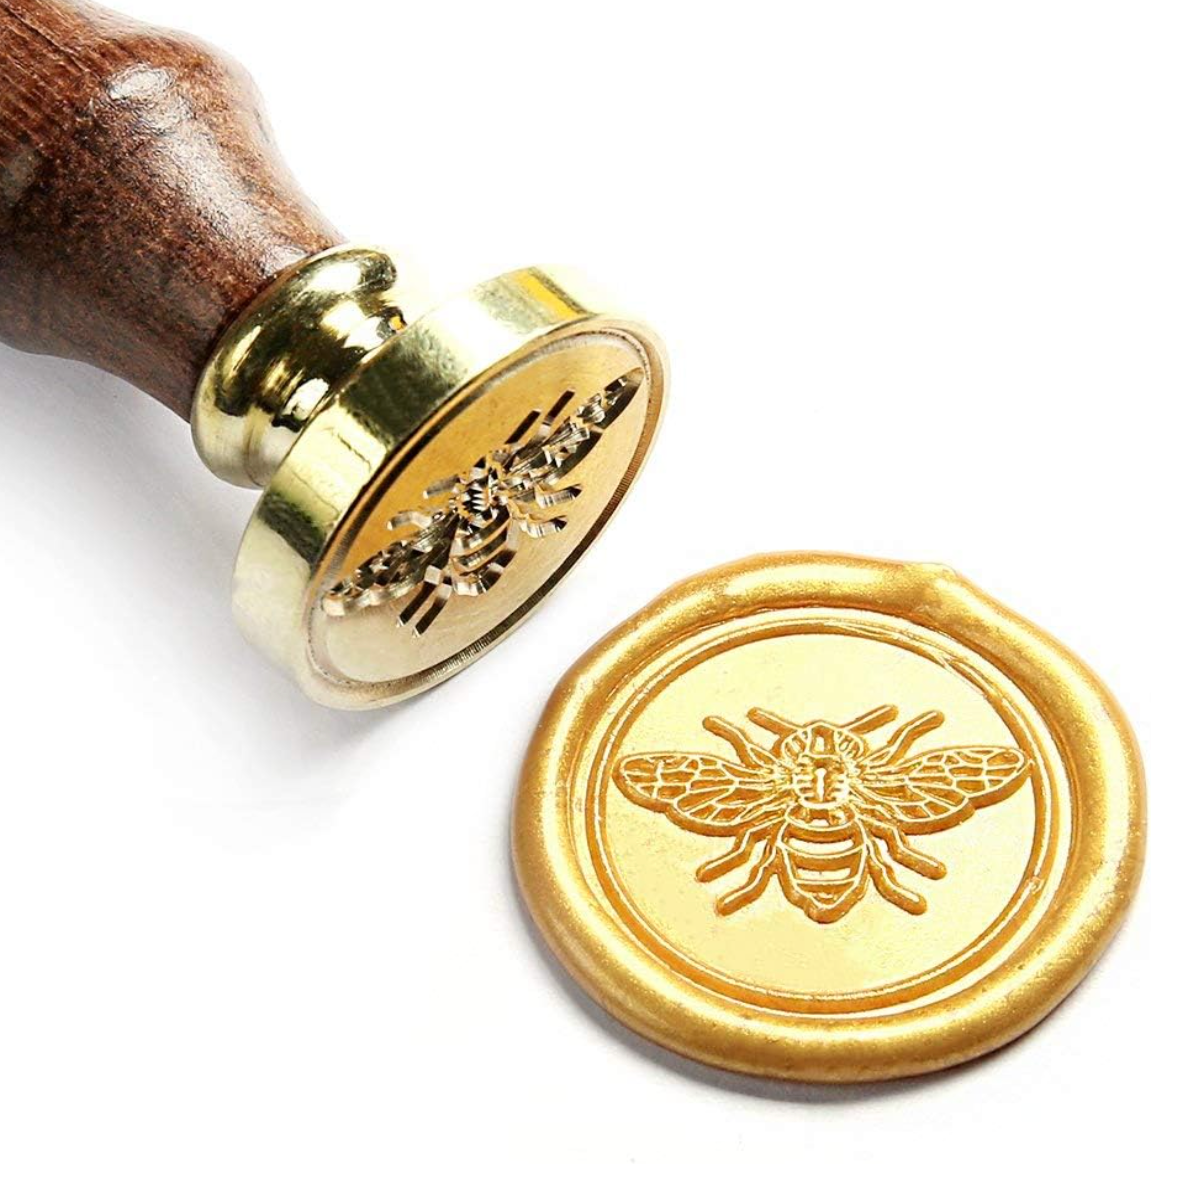 Wax Seal Stamp - Bee